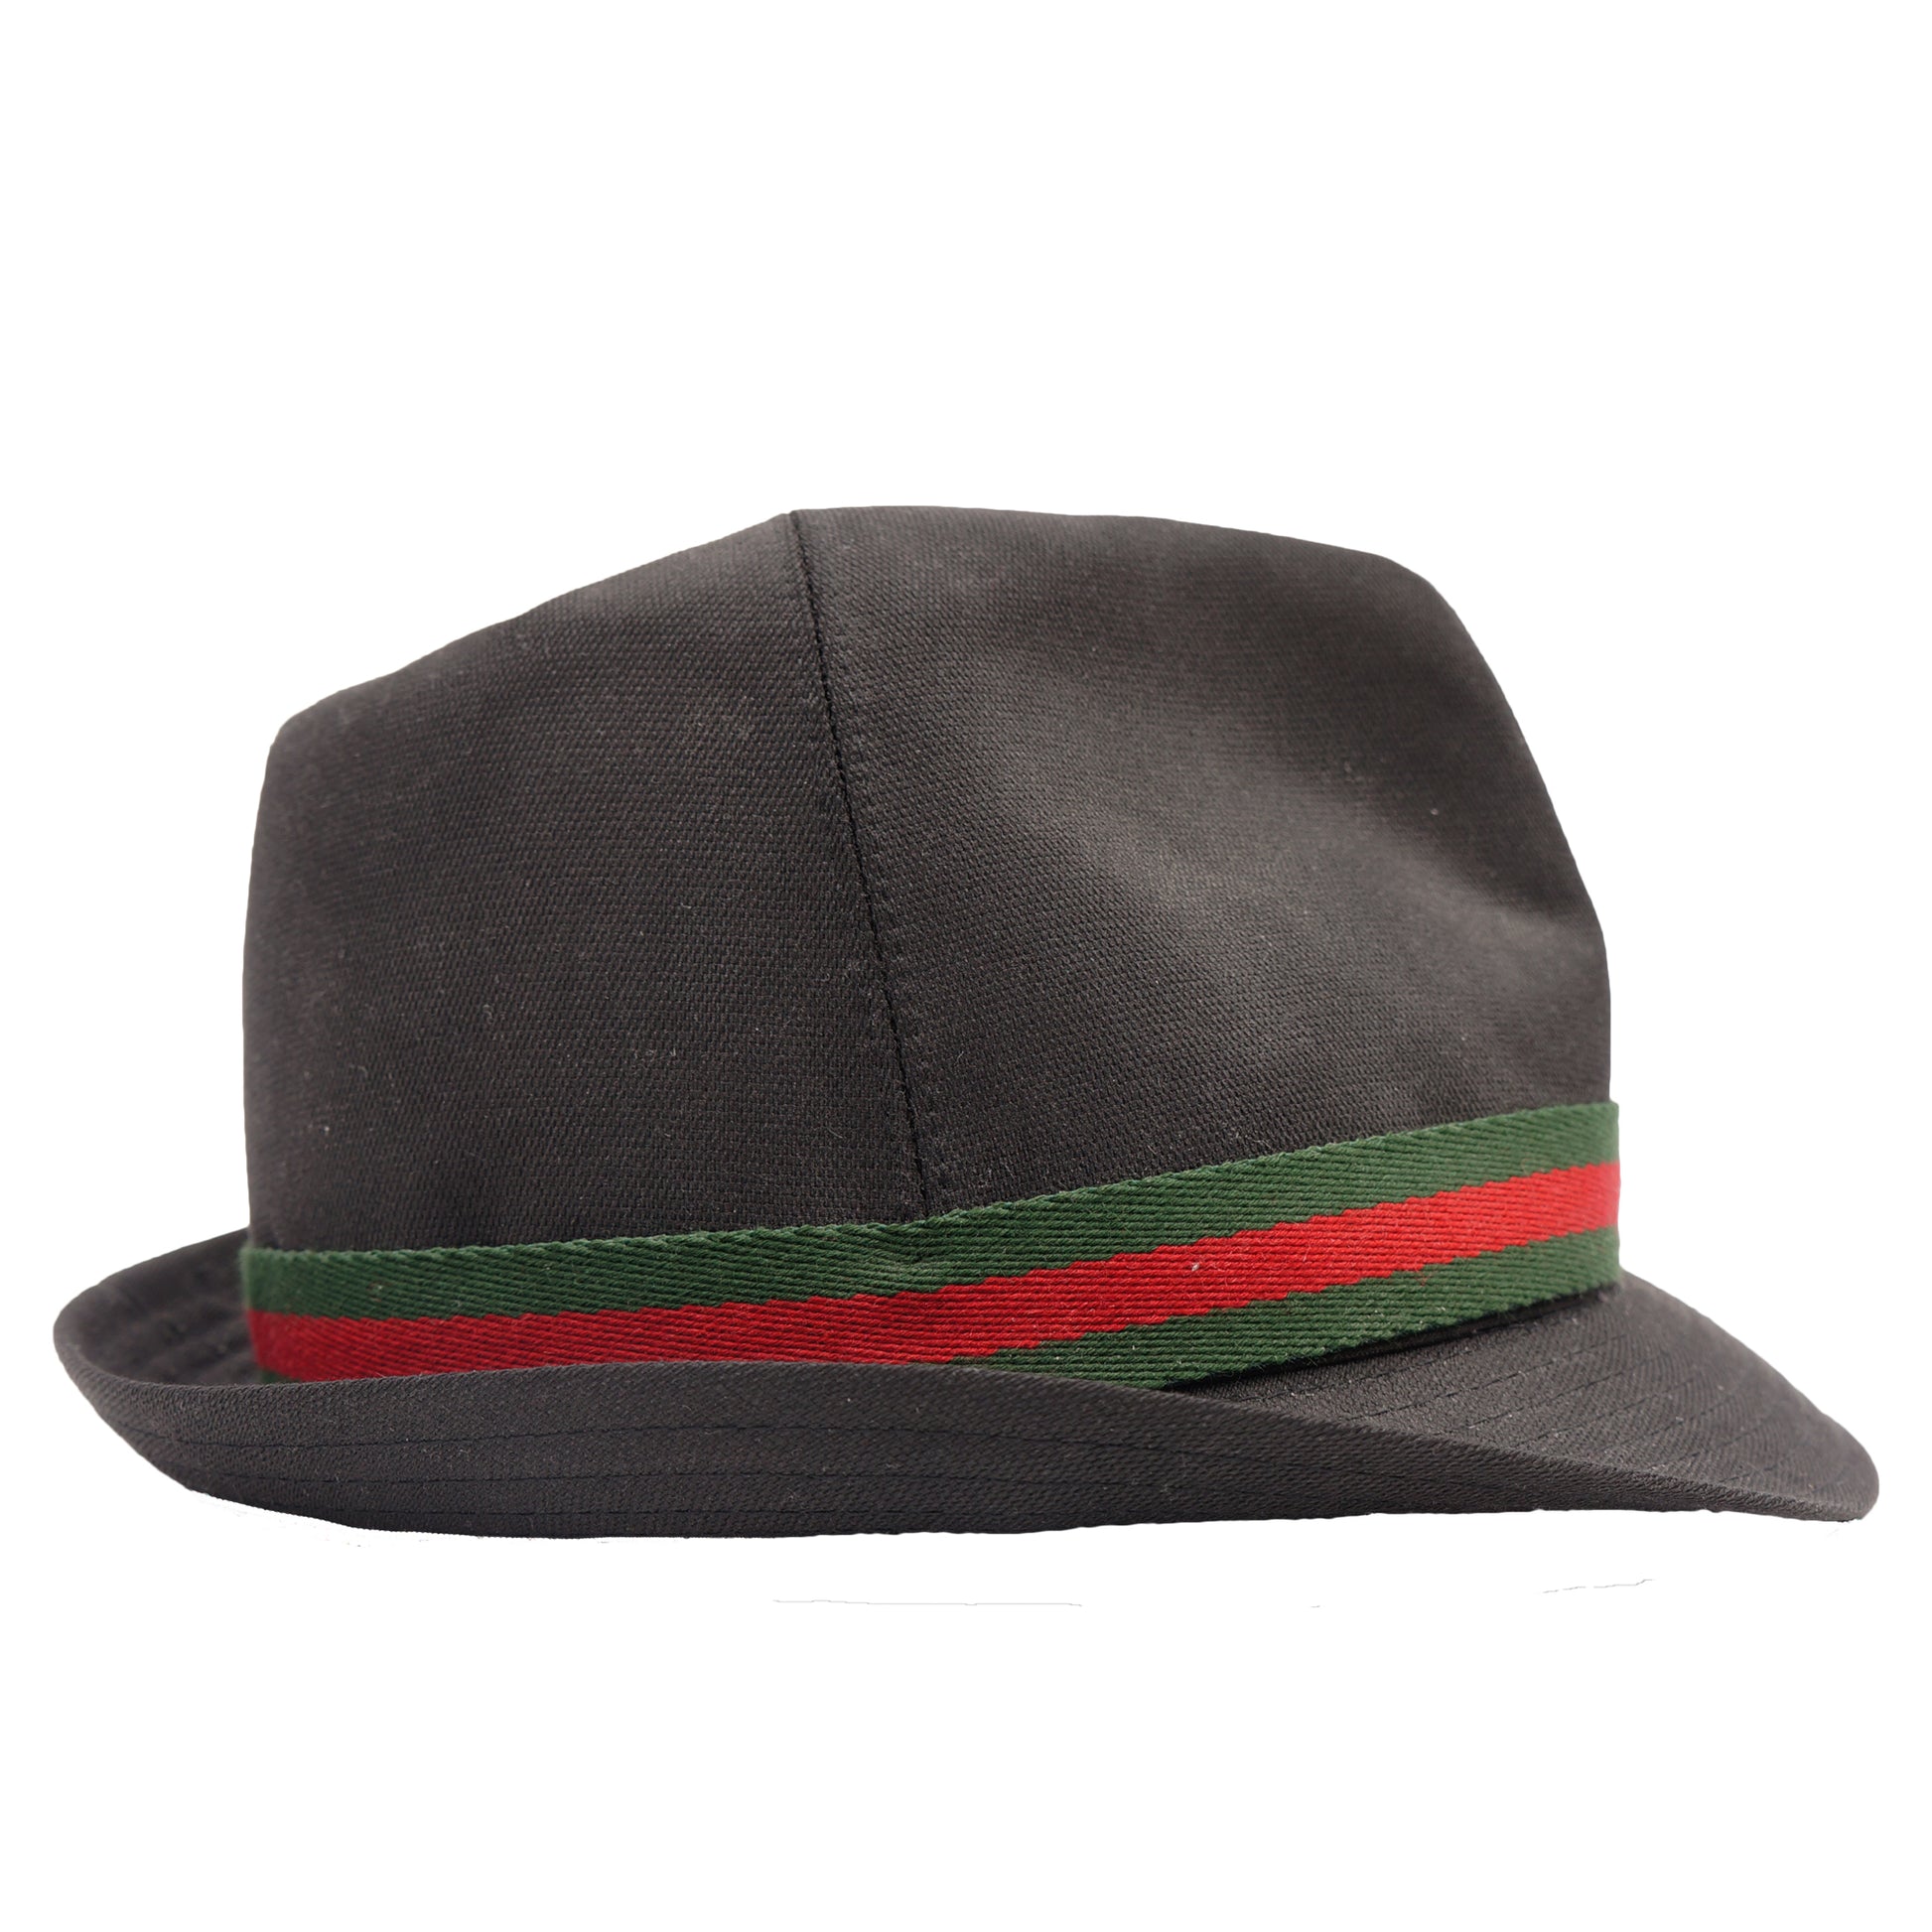 Buy Gucci Fedora Hats online - Men - 3 products